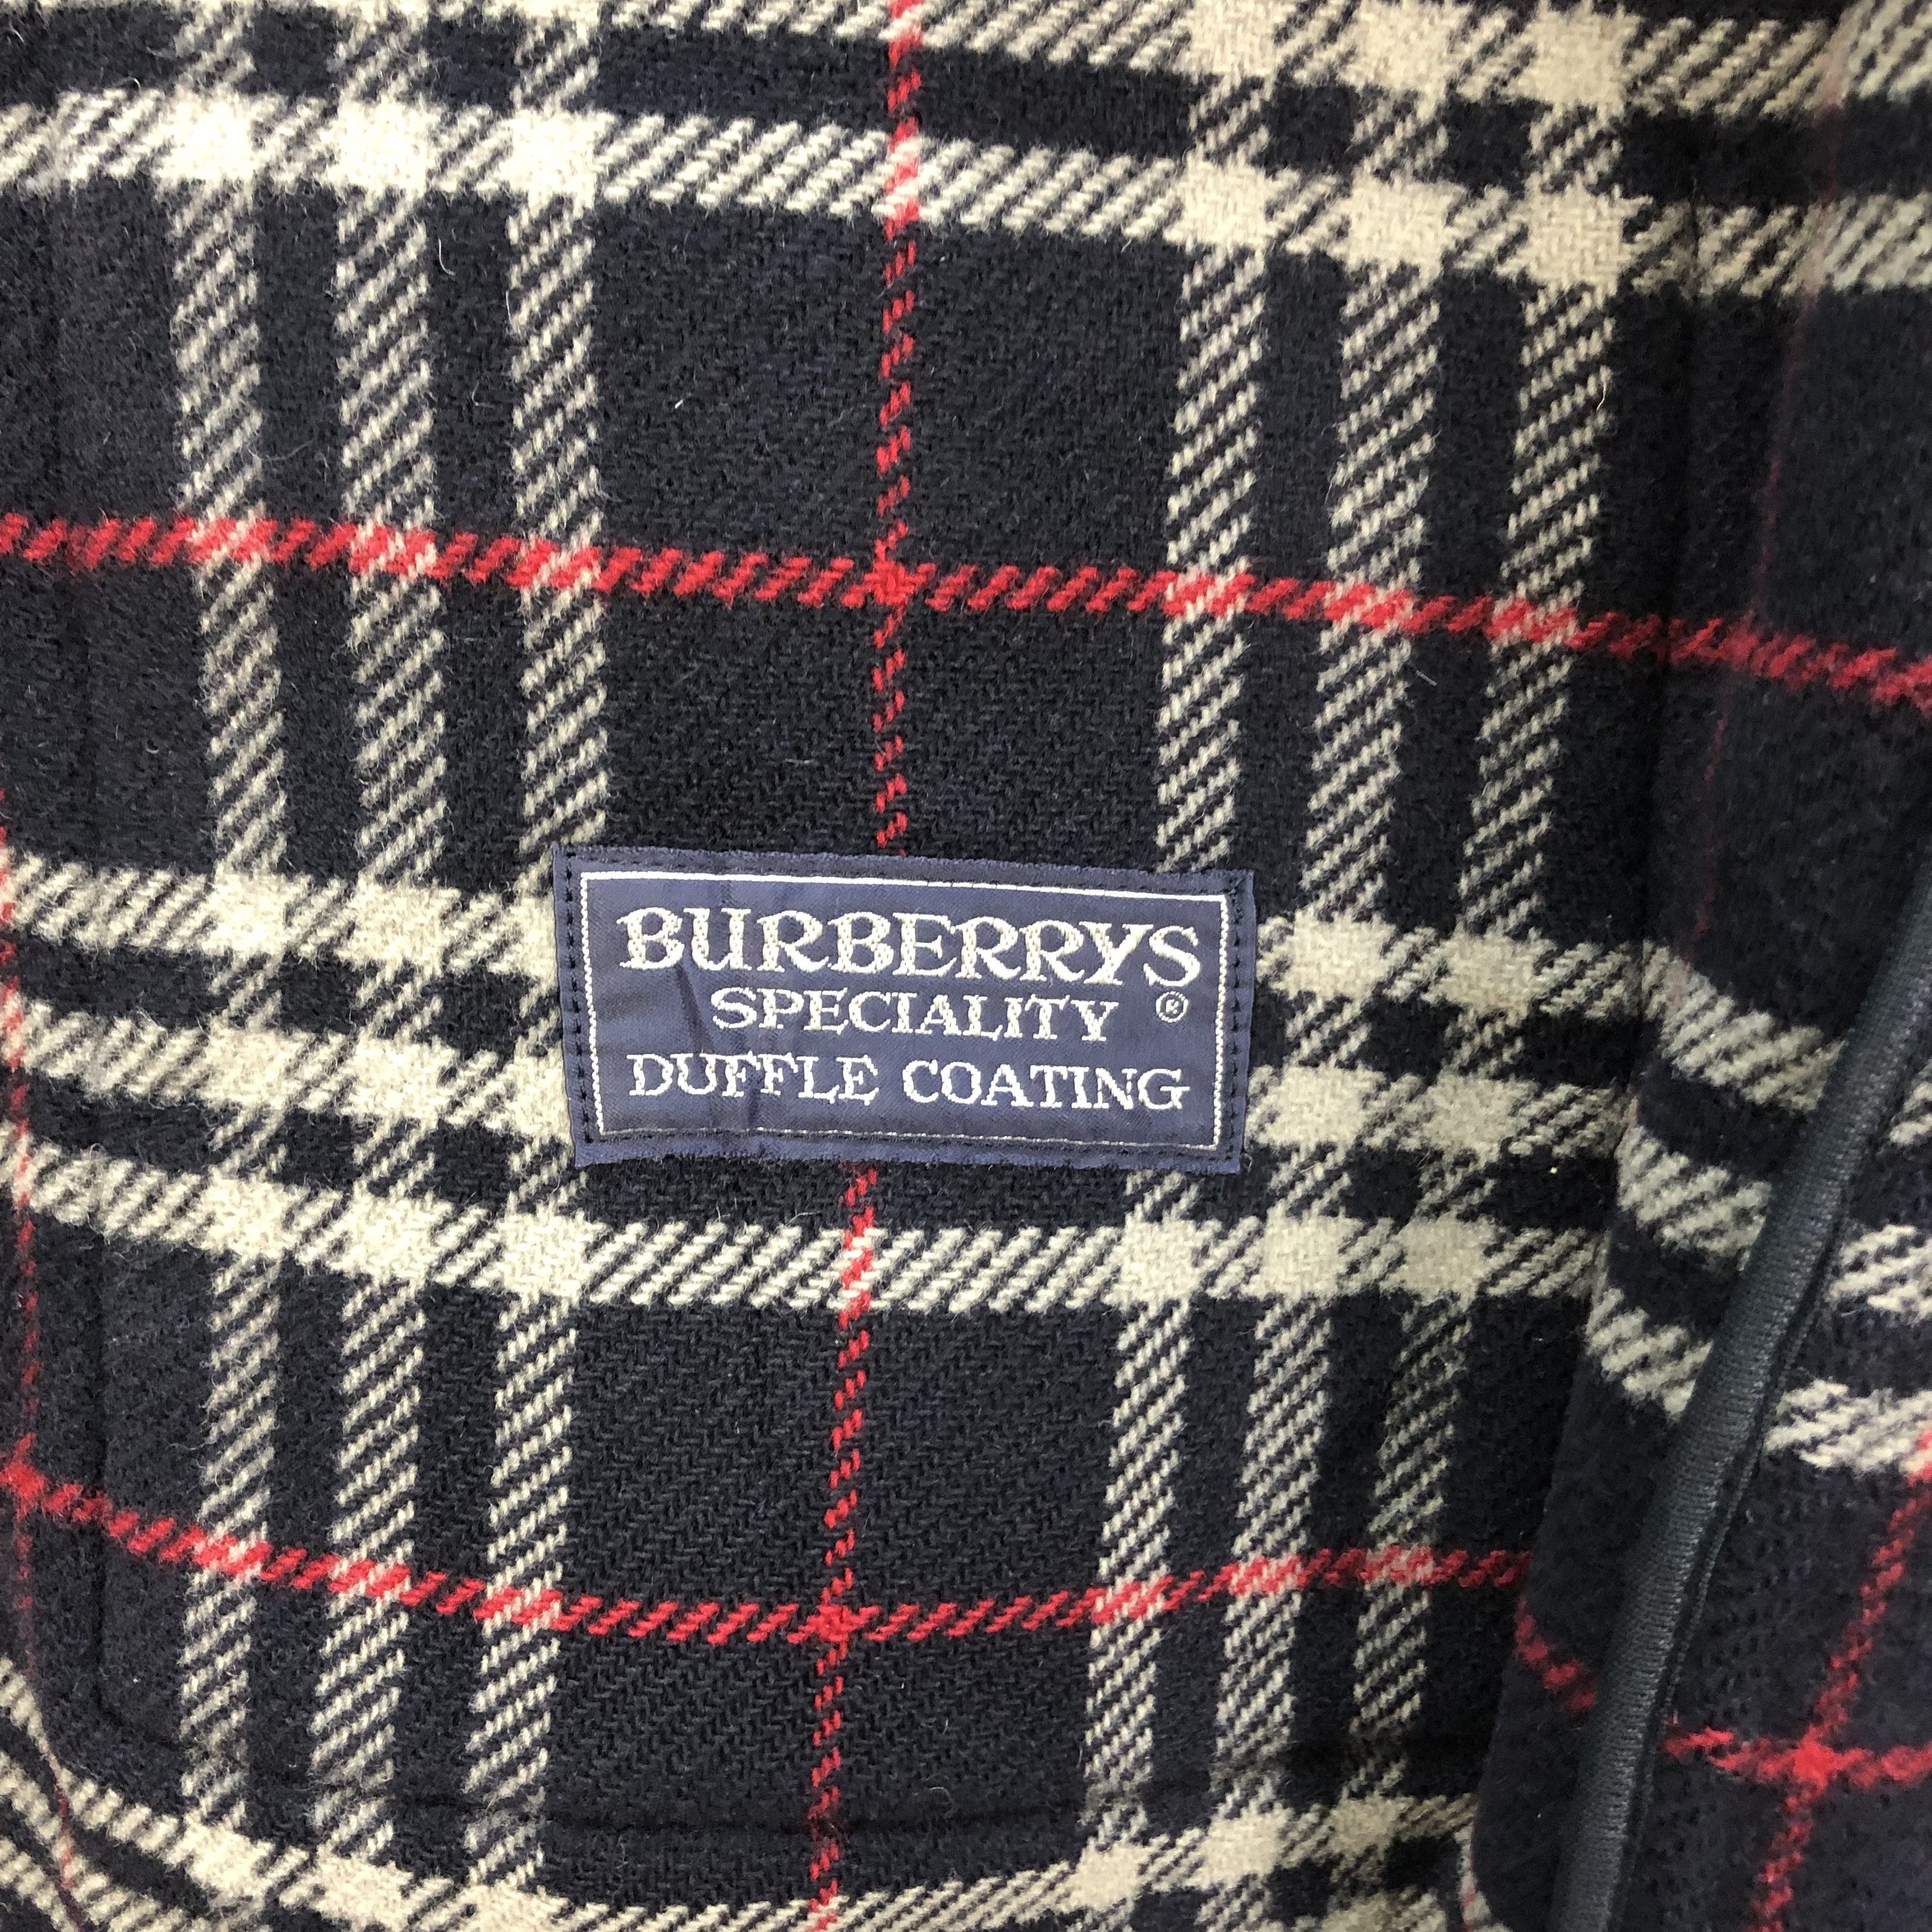 Vintage - BURBERRYS' MADE IN ENGLAND DUFFLE COAT #6851-91 - 8